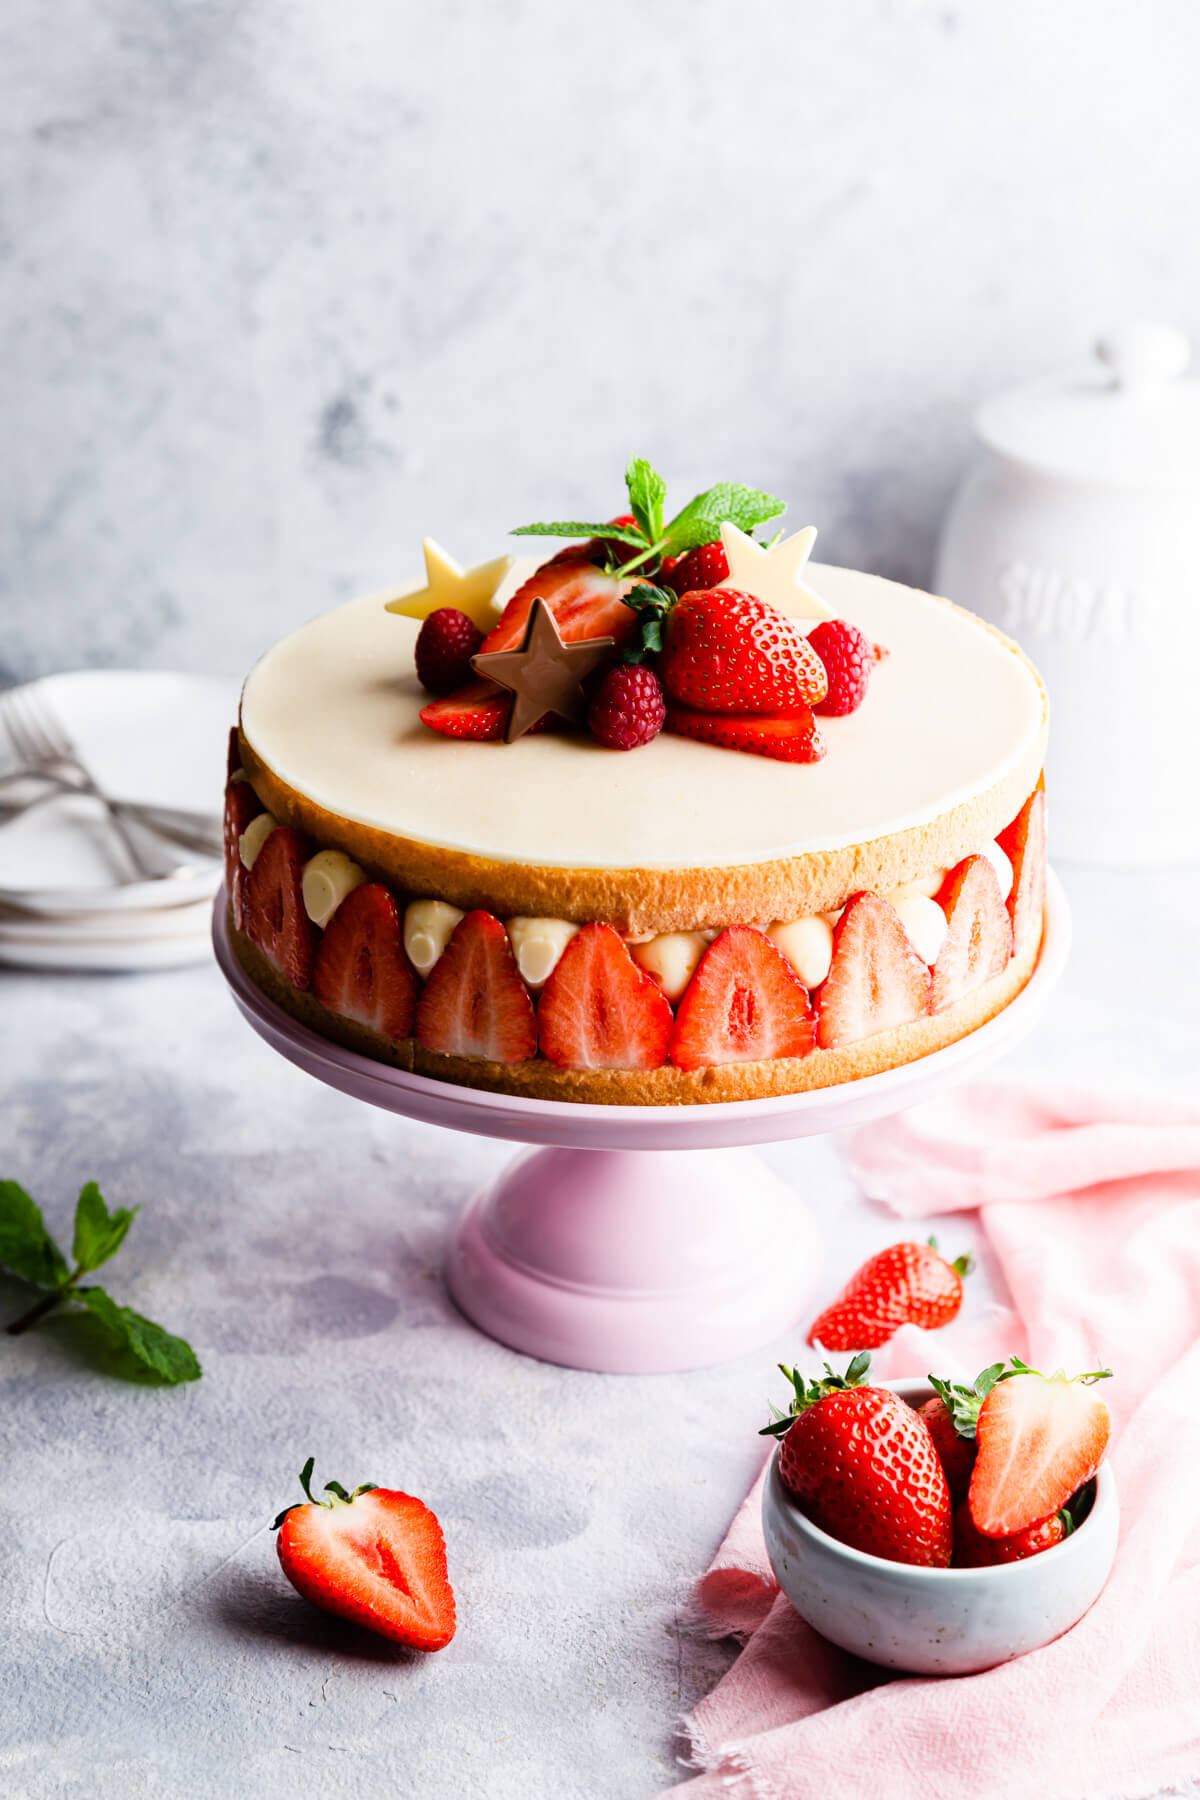 45 degree angle photo of fresh strawberry cake with creme mousseline